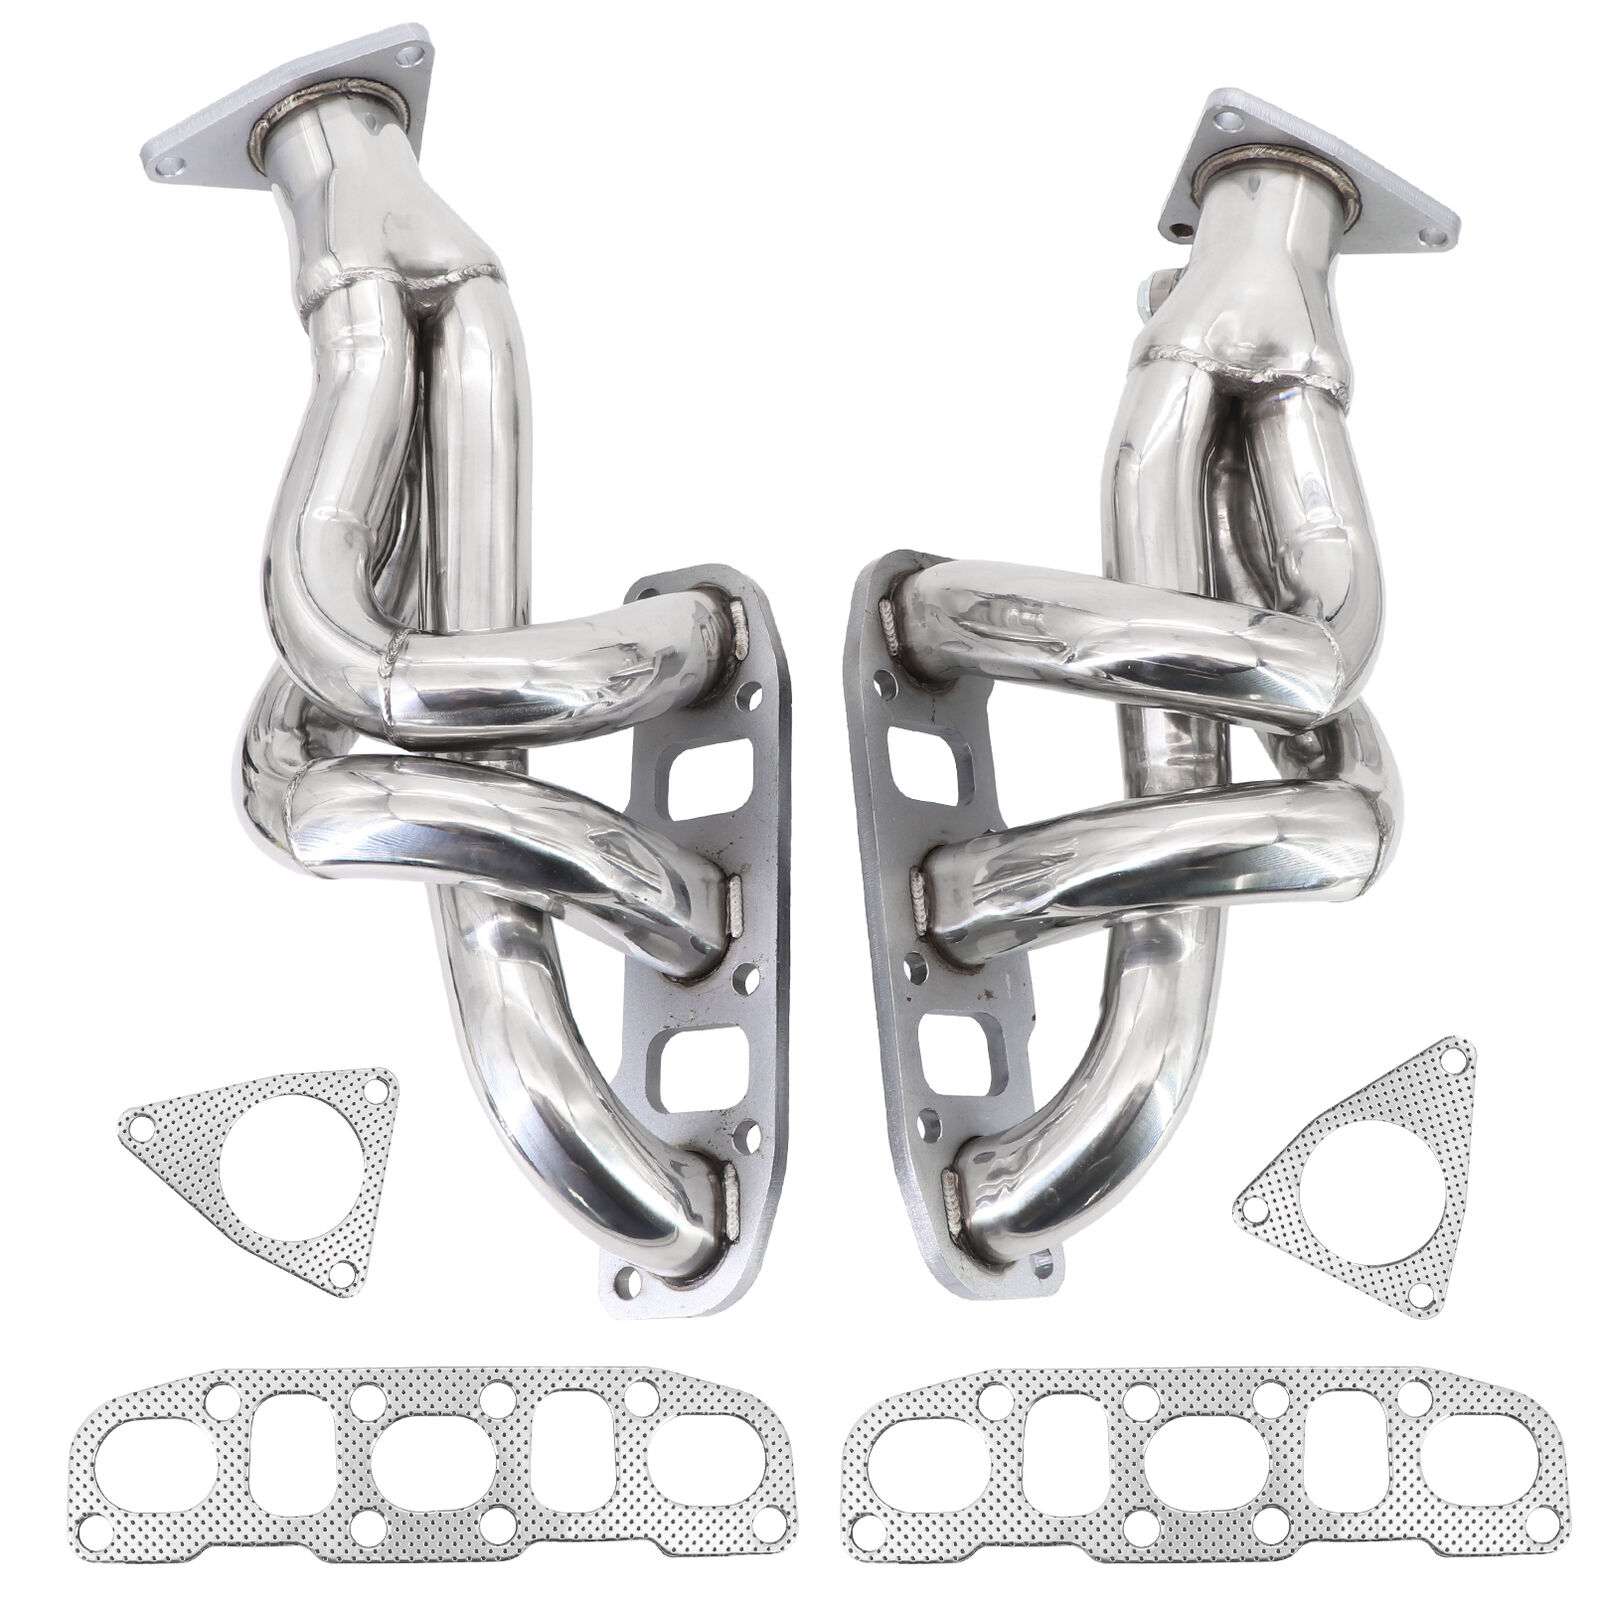 Stainless Steel Exhaust Header Manifold For 09-20 Nissan 370Z Z34 08-13 G37 VQ37